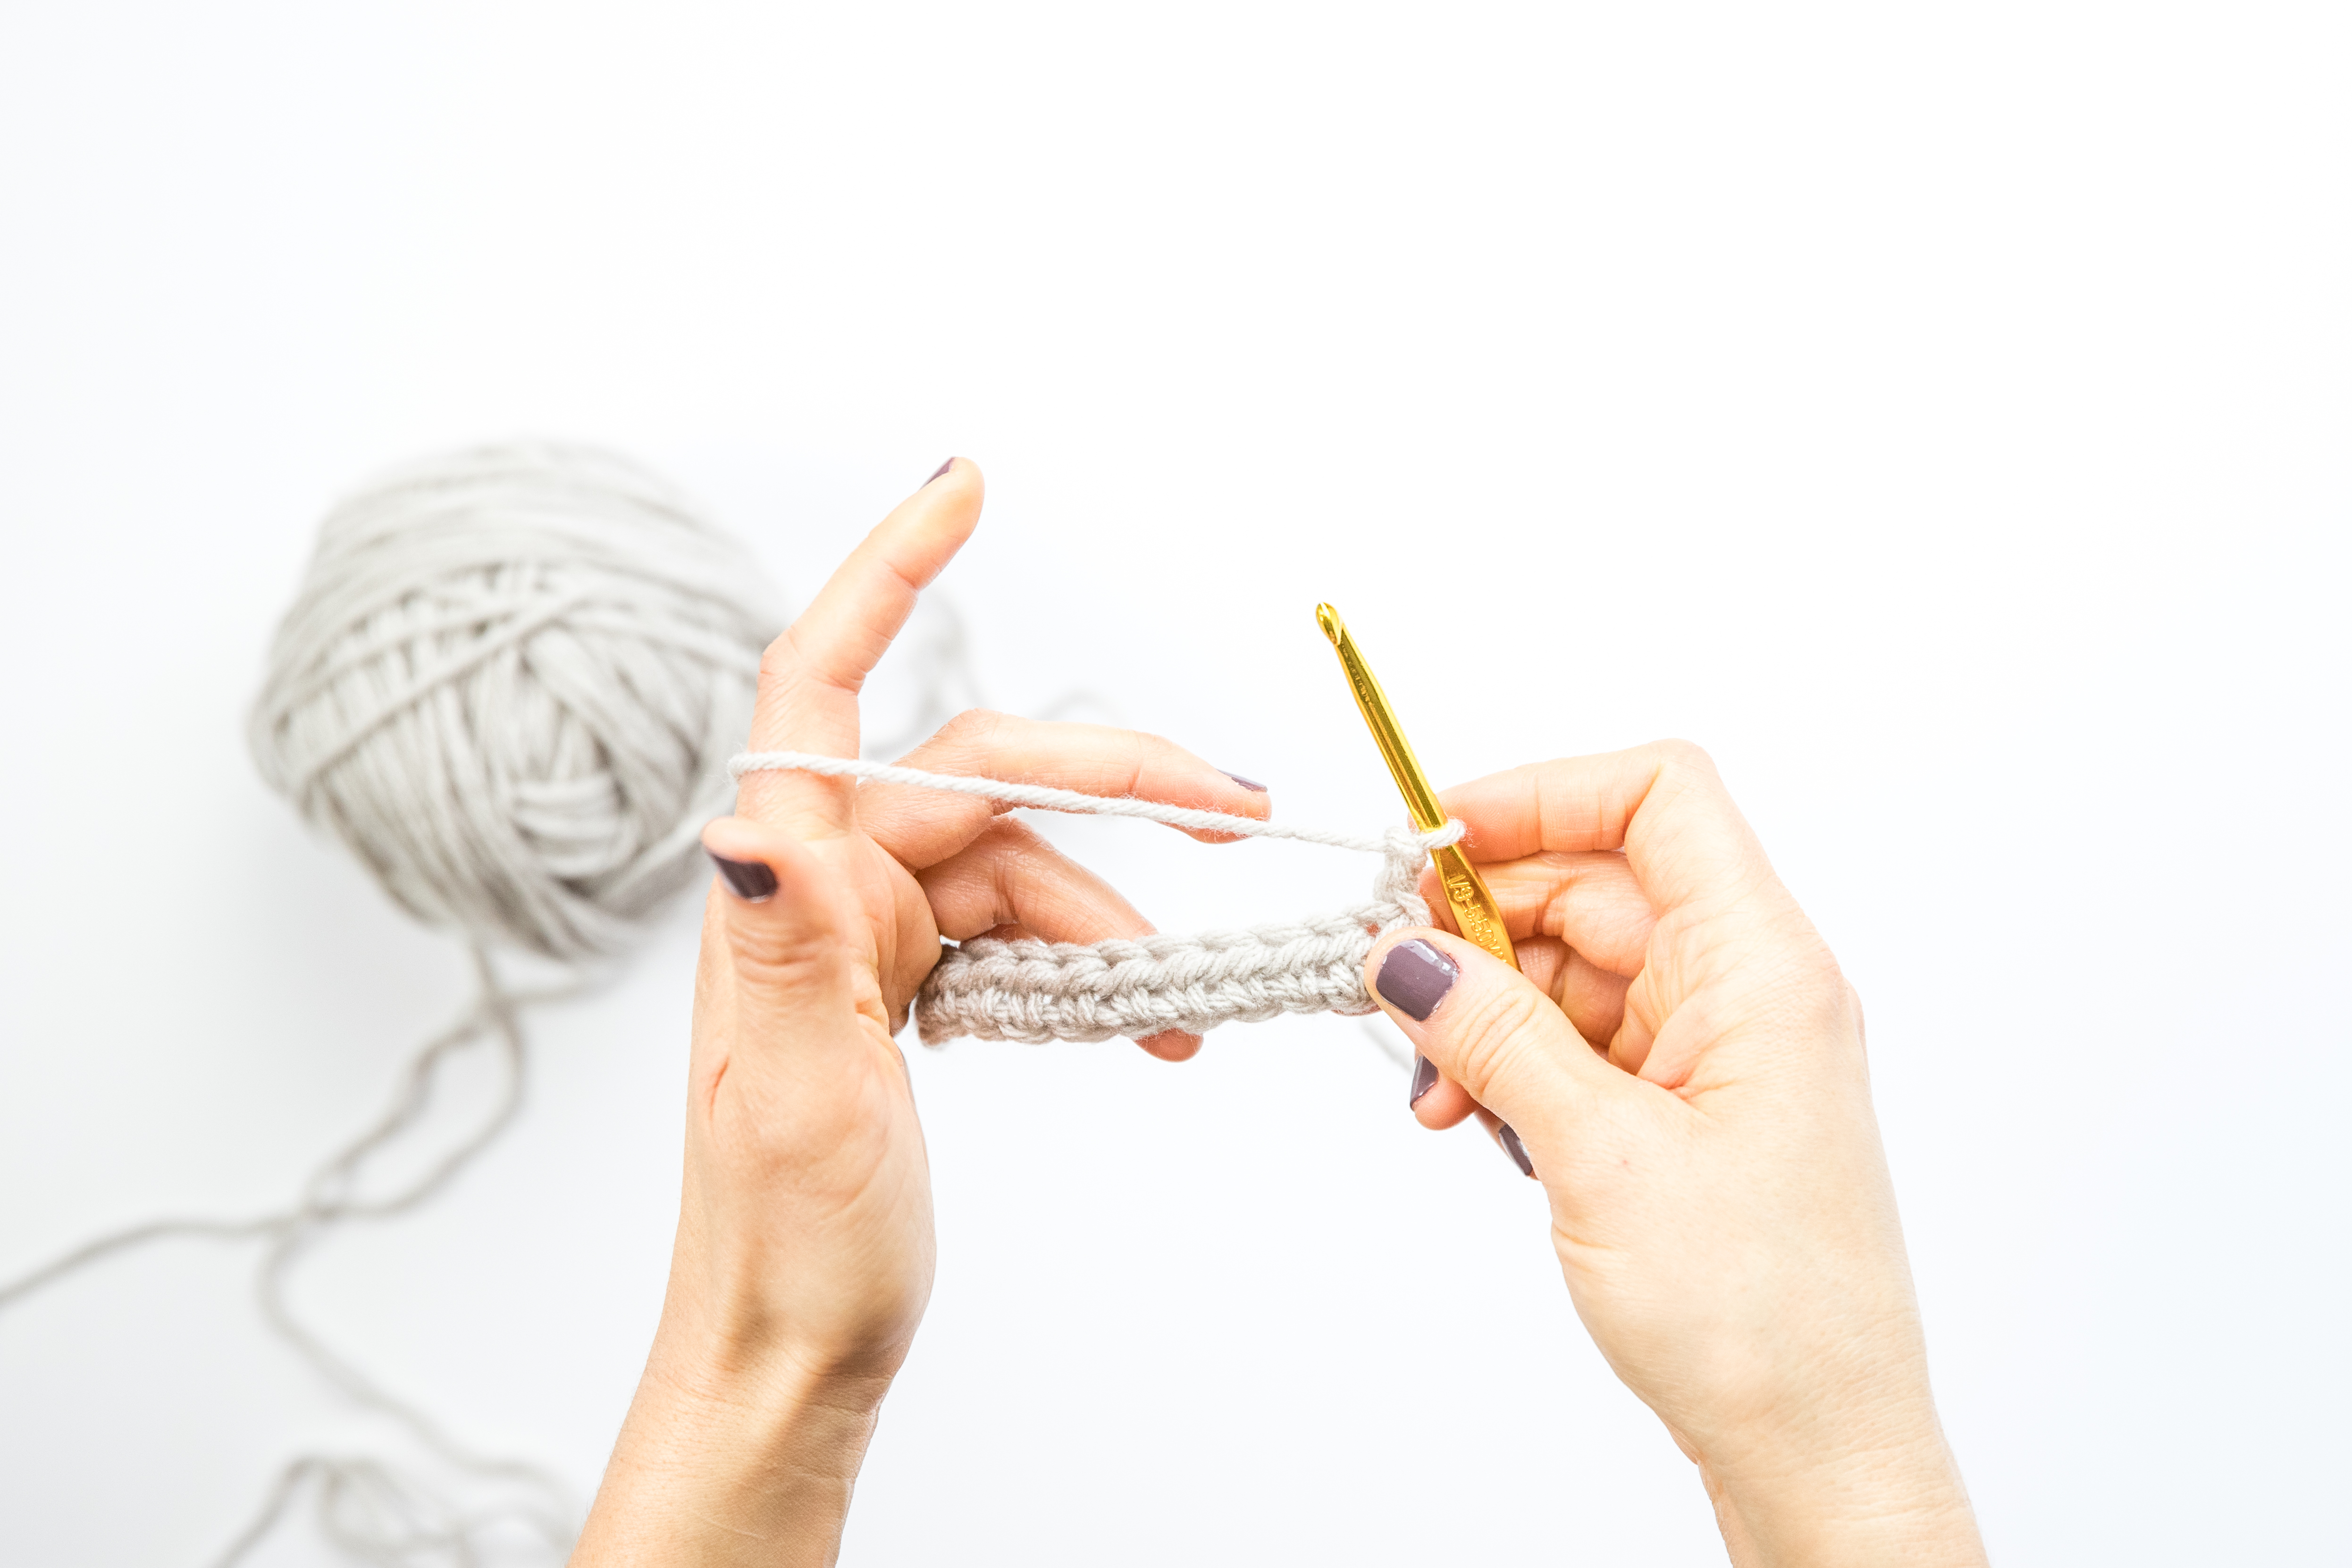 Learn how to crochet! - Easy video tutorials and everything you need to know to get started // www.deliacreates.com